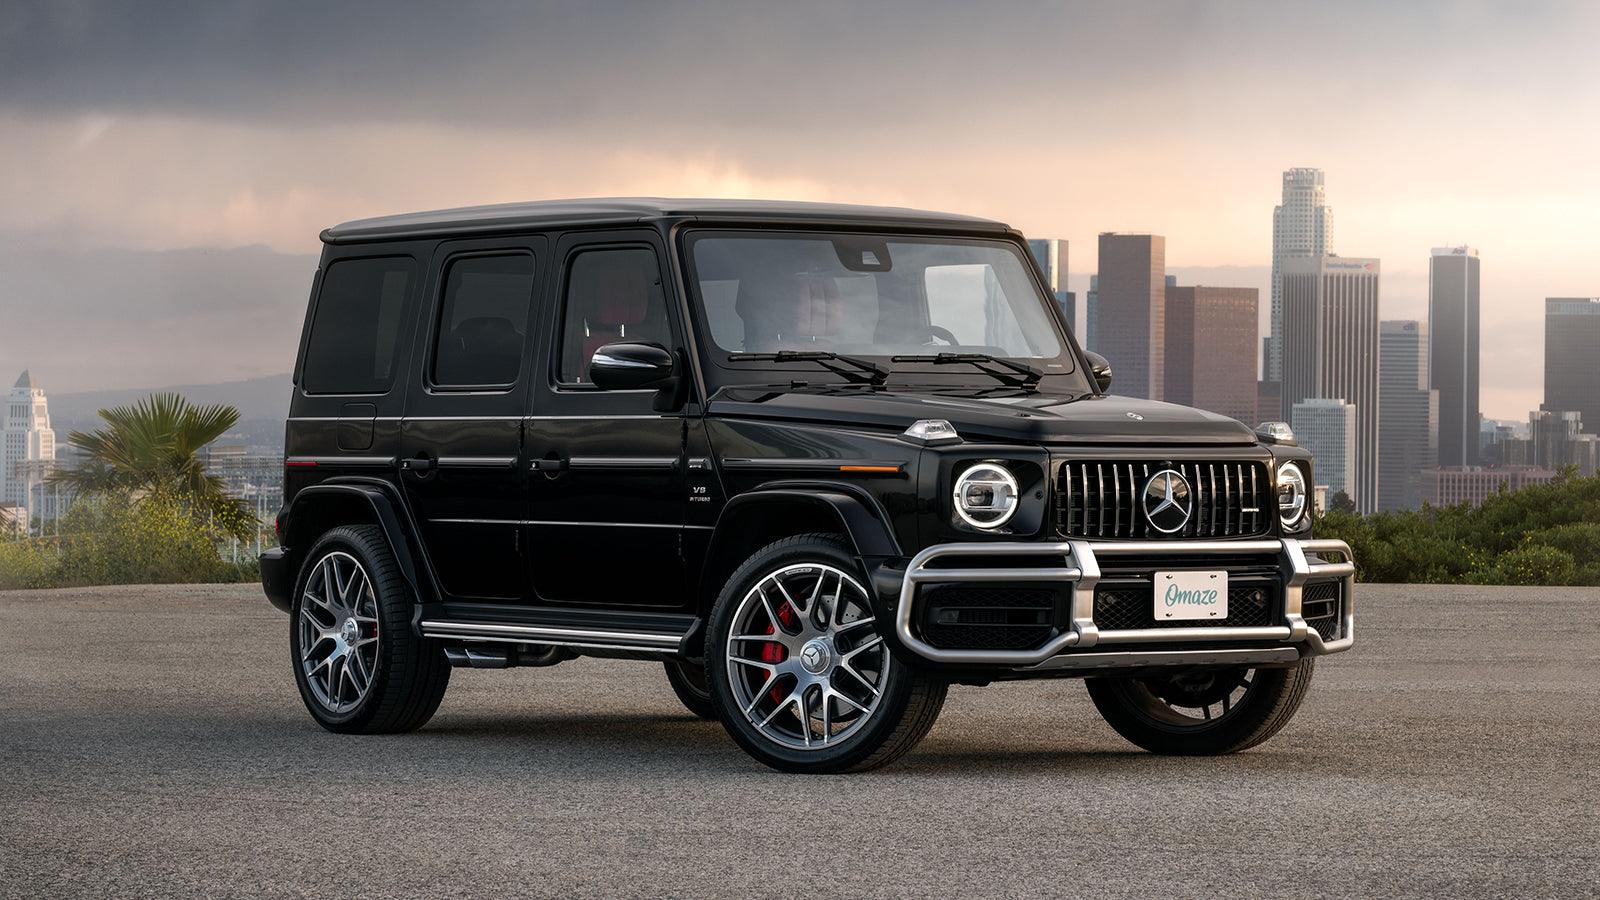 Win Your Own Mercedes Benz G Wagen With 000 In The Trunk